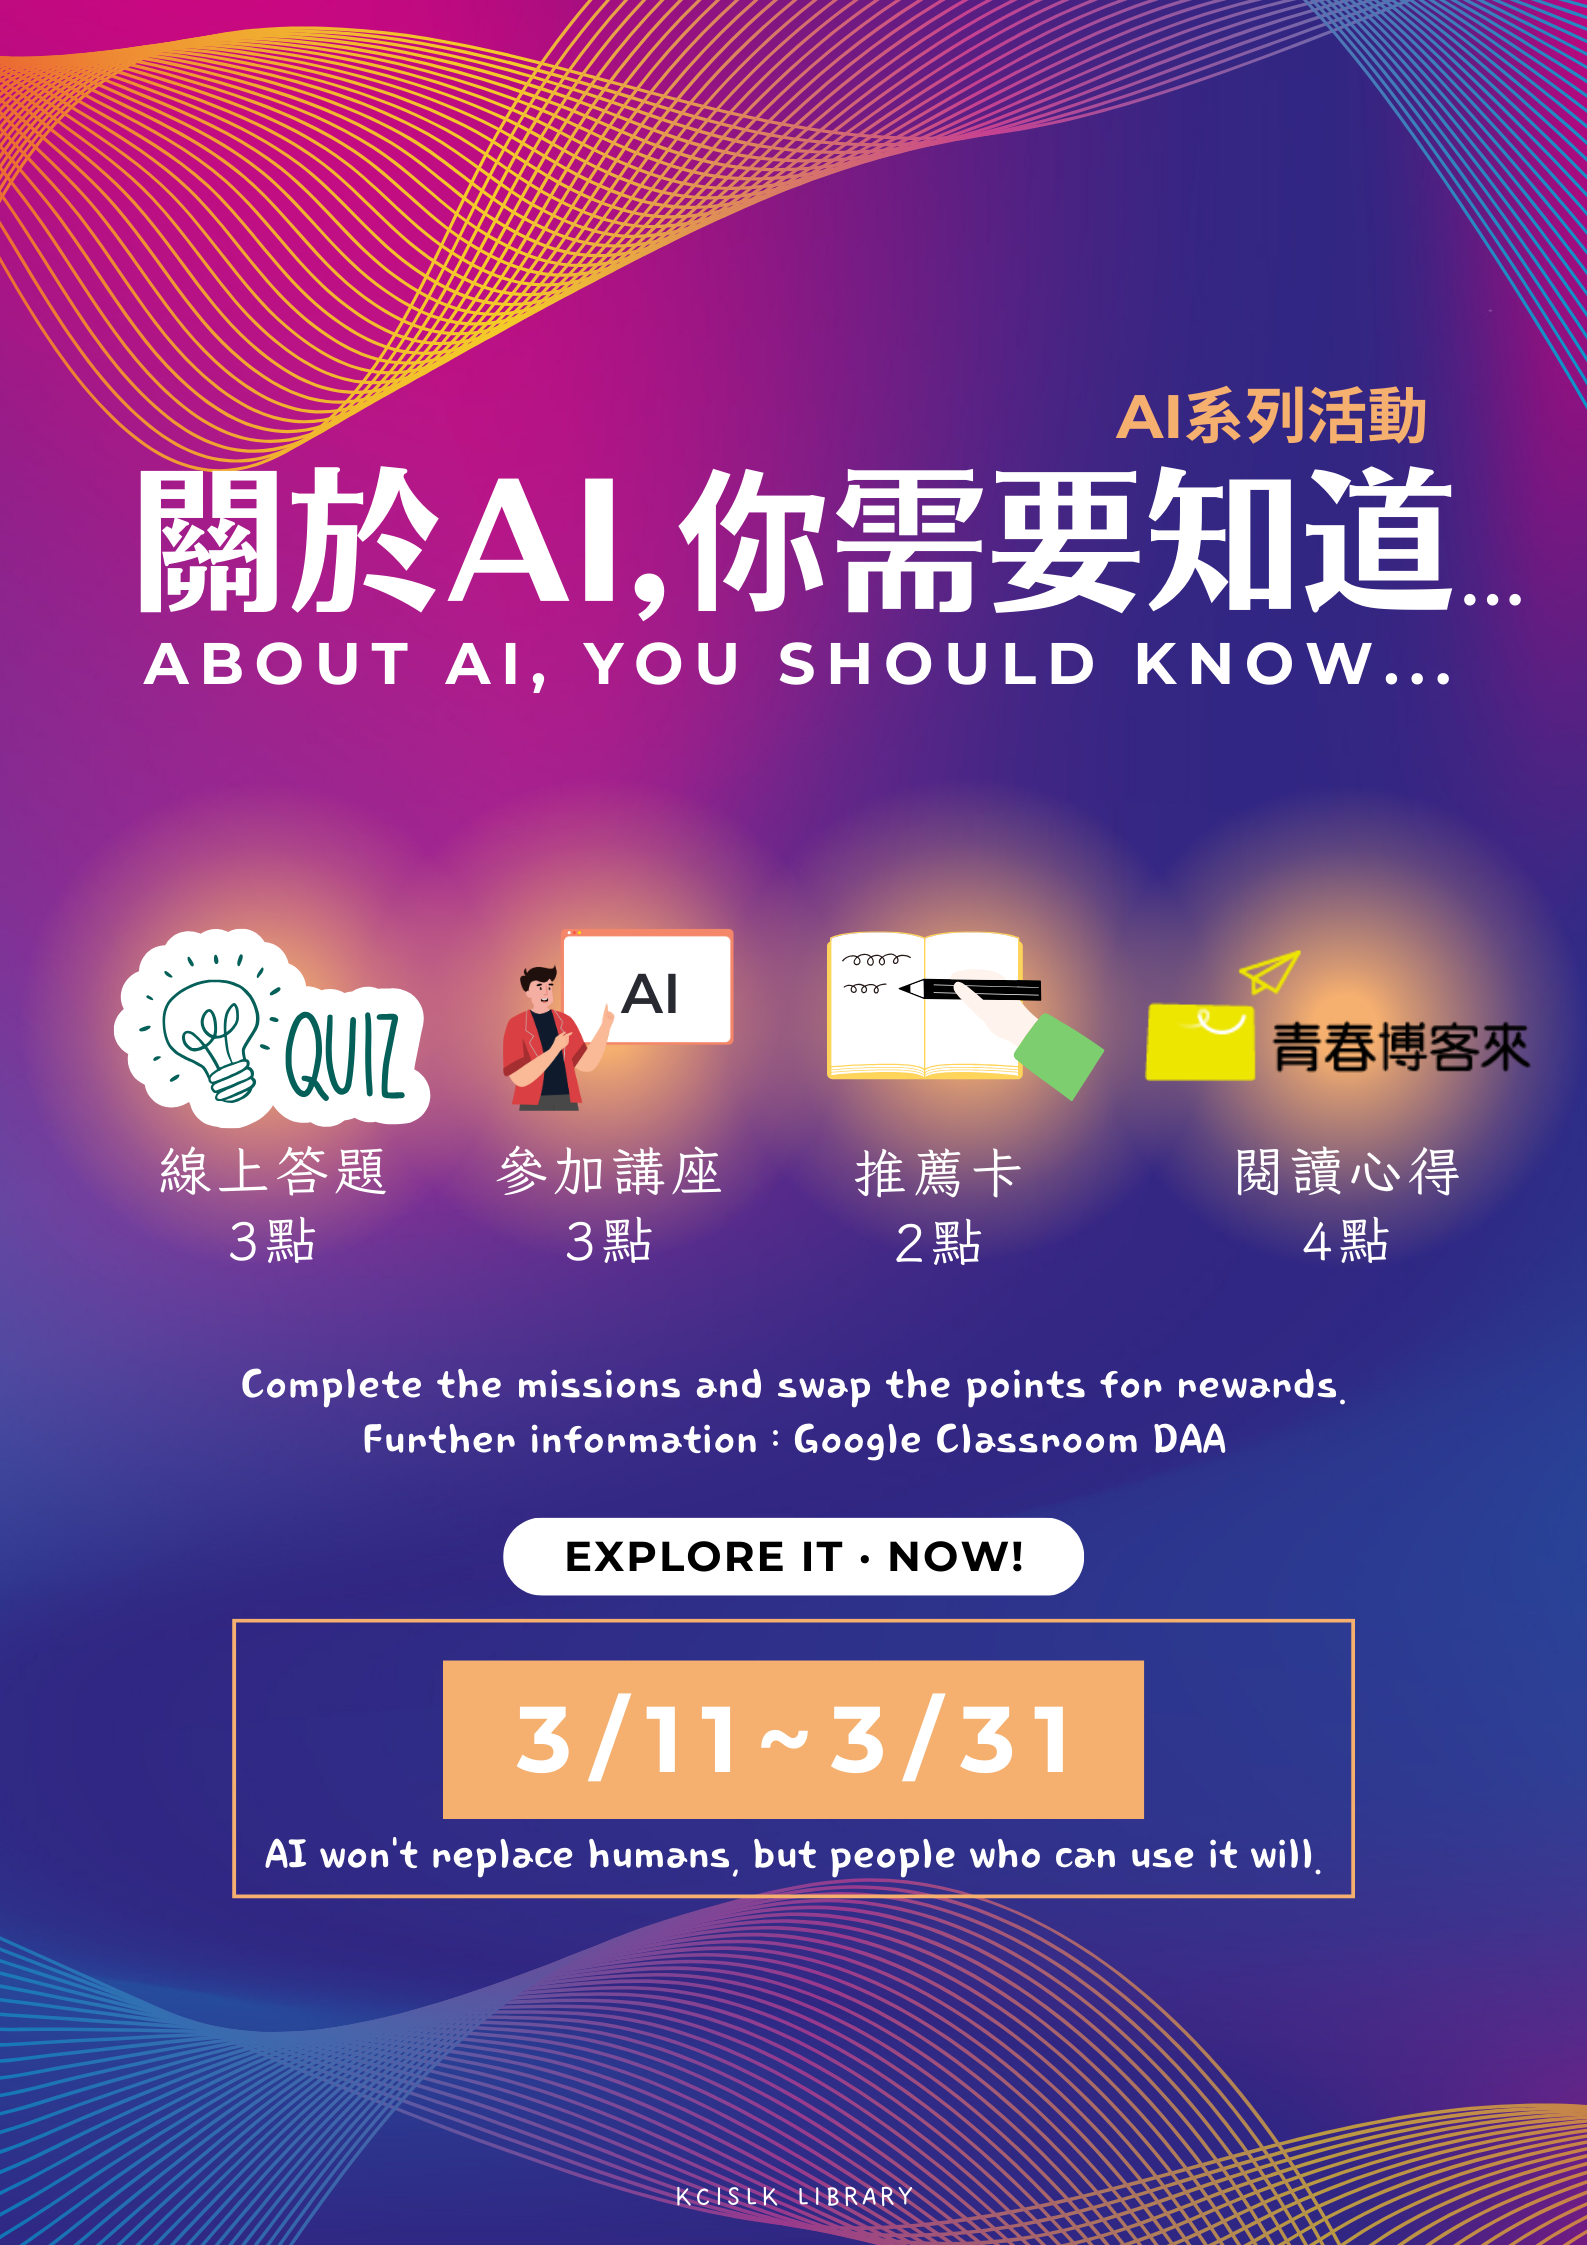 About AI,you should know...關於AI，你需要知道...